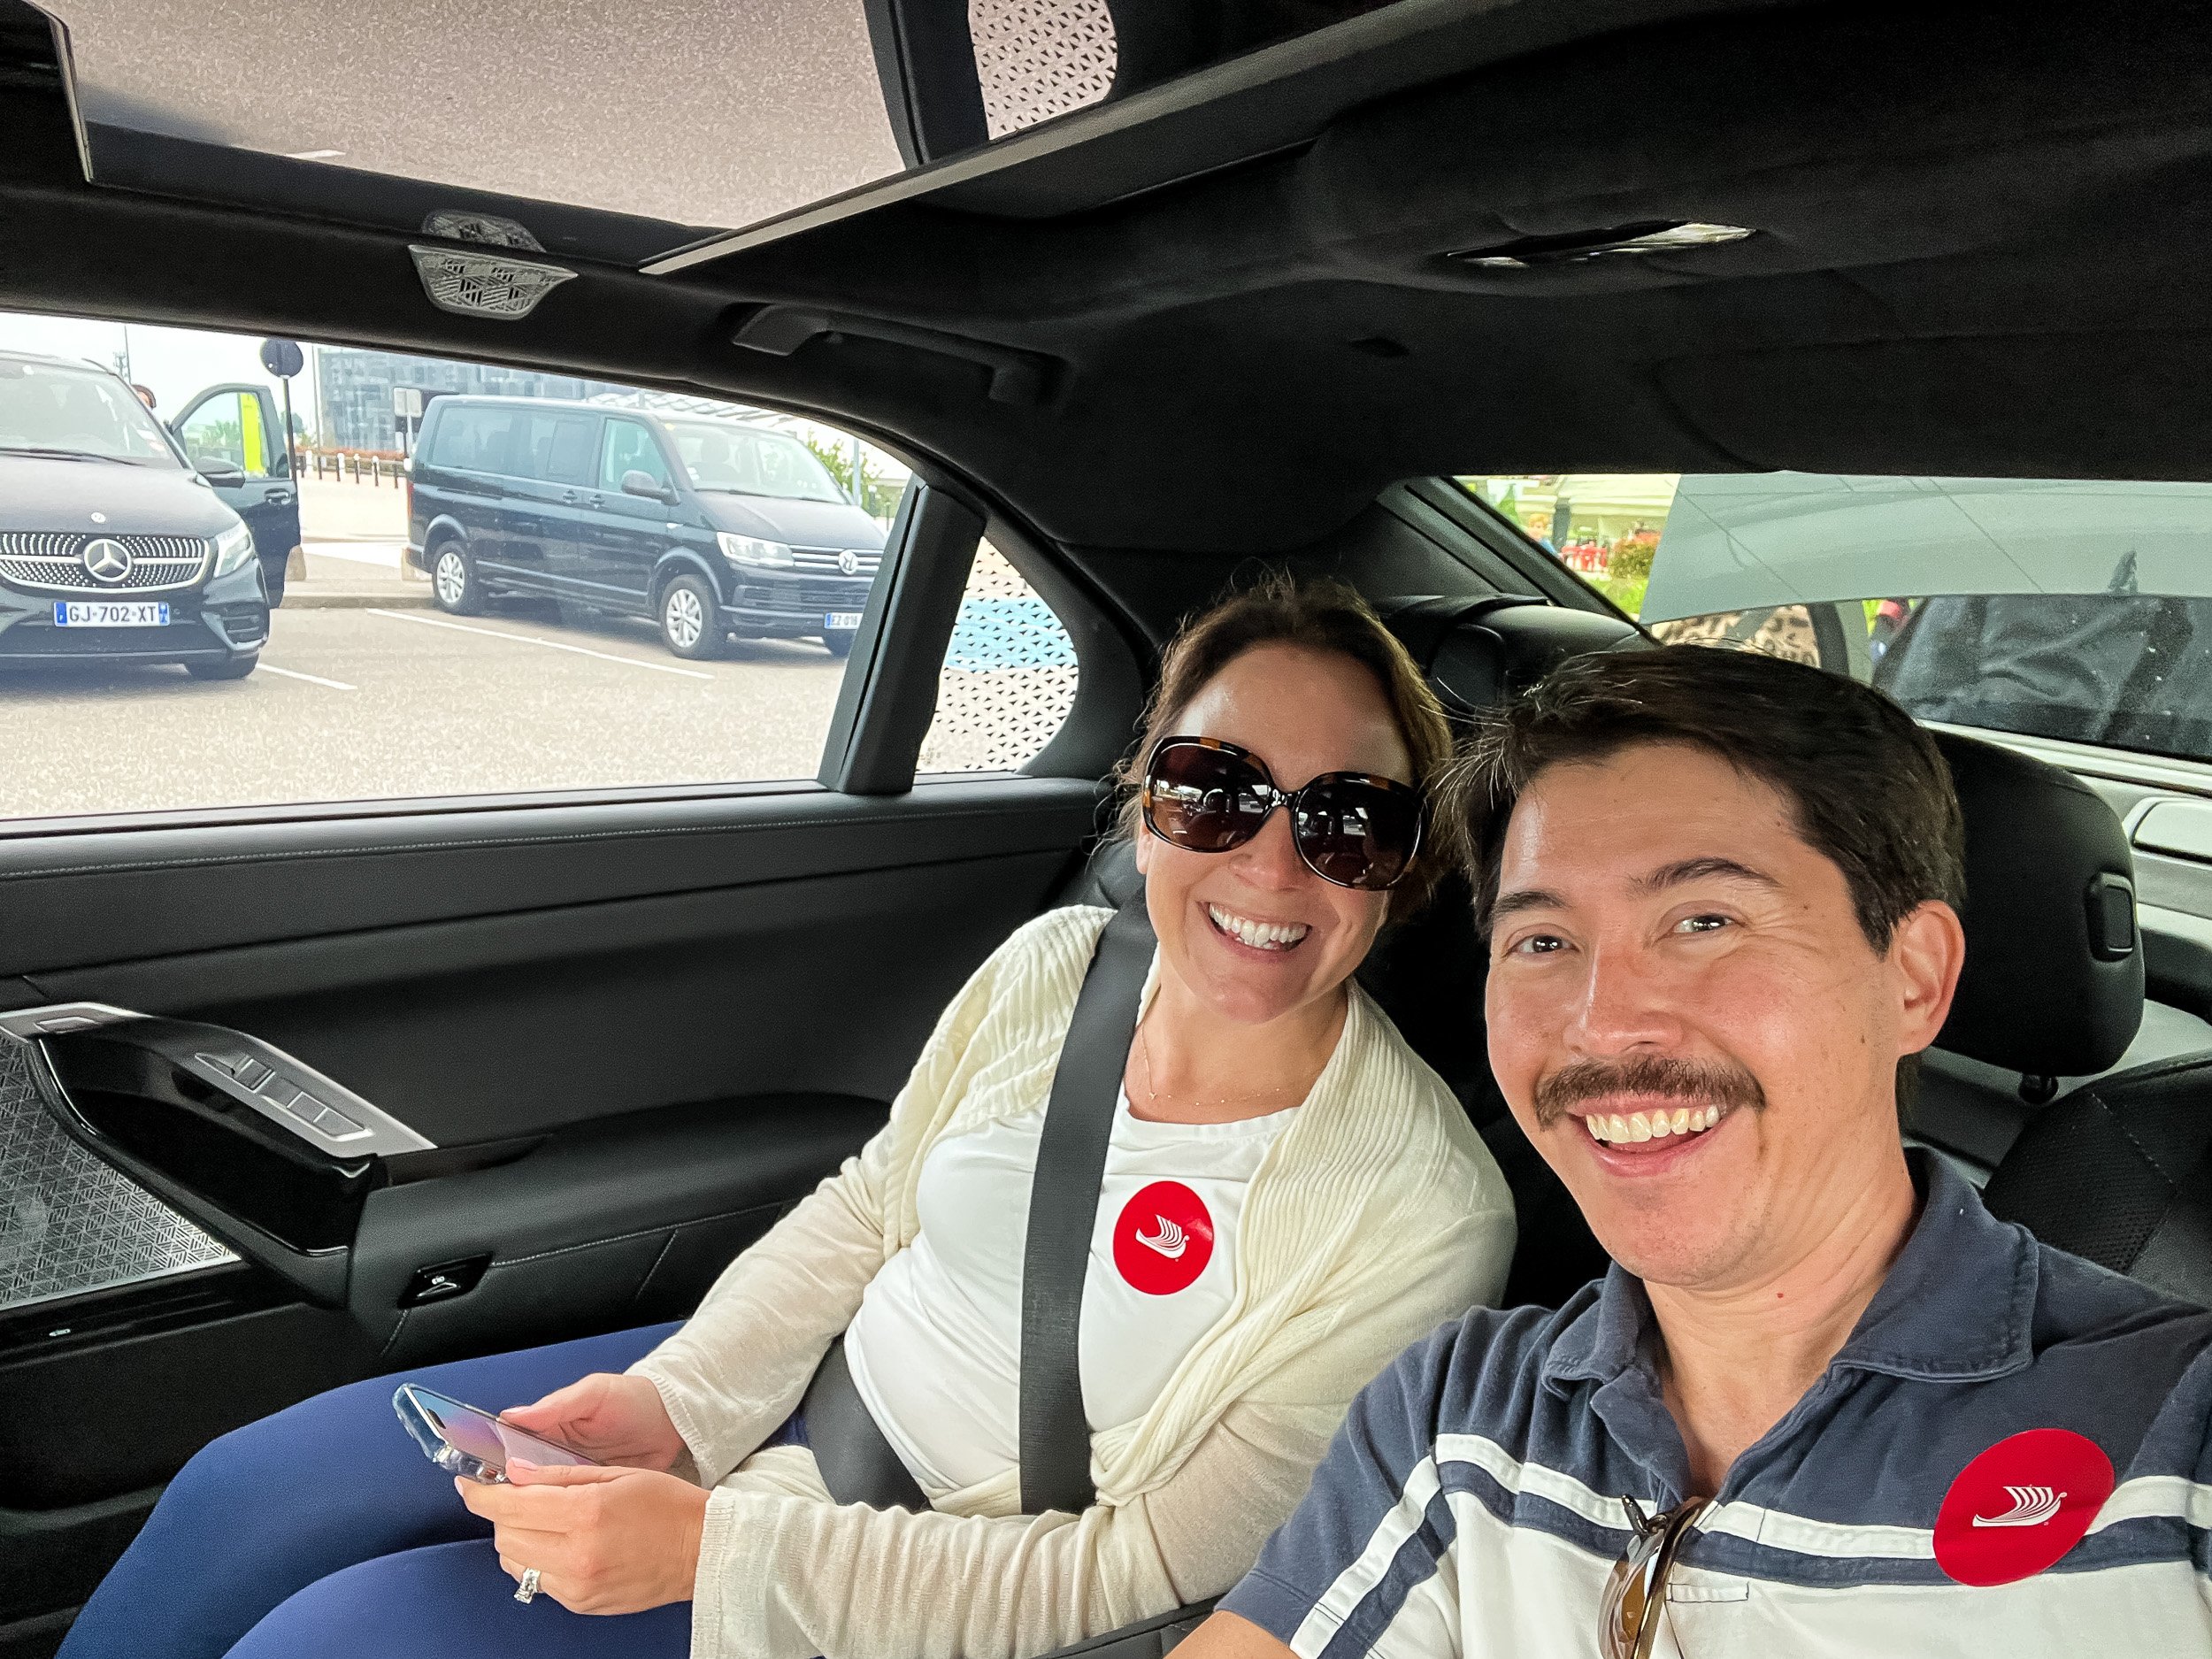 Rachelle and Pete, wearing red Viking stickers to identify they're with Viking River Cruises, in the airport pickup vehicle on their way to the ship. 